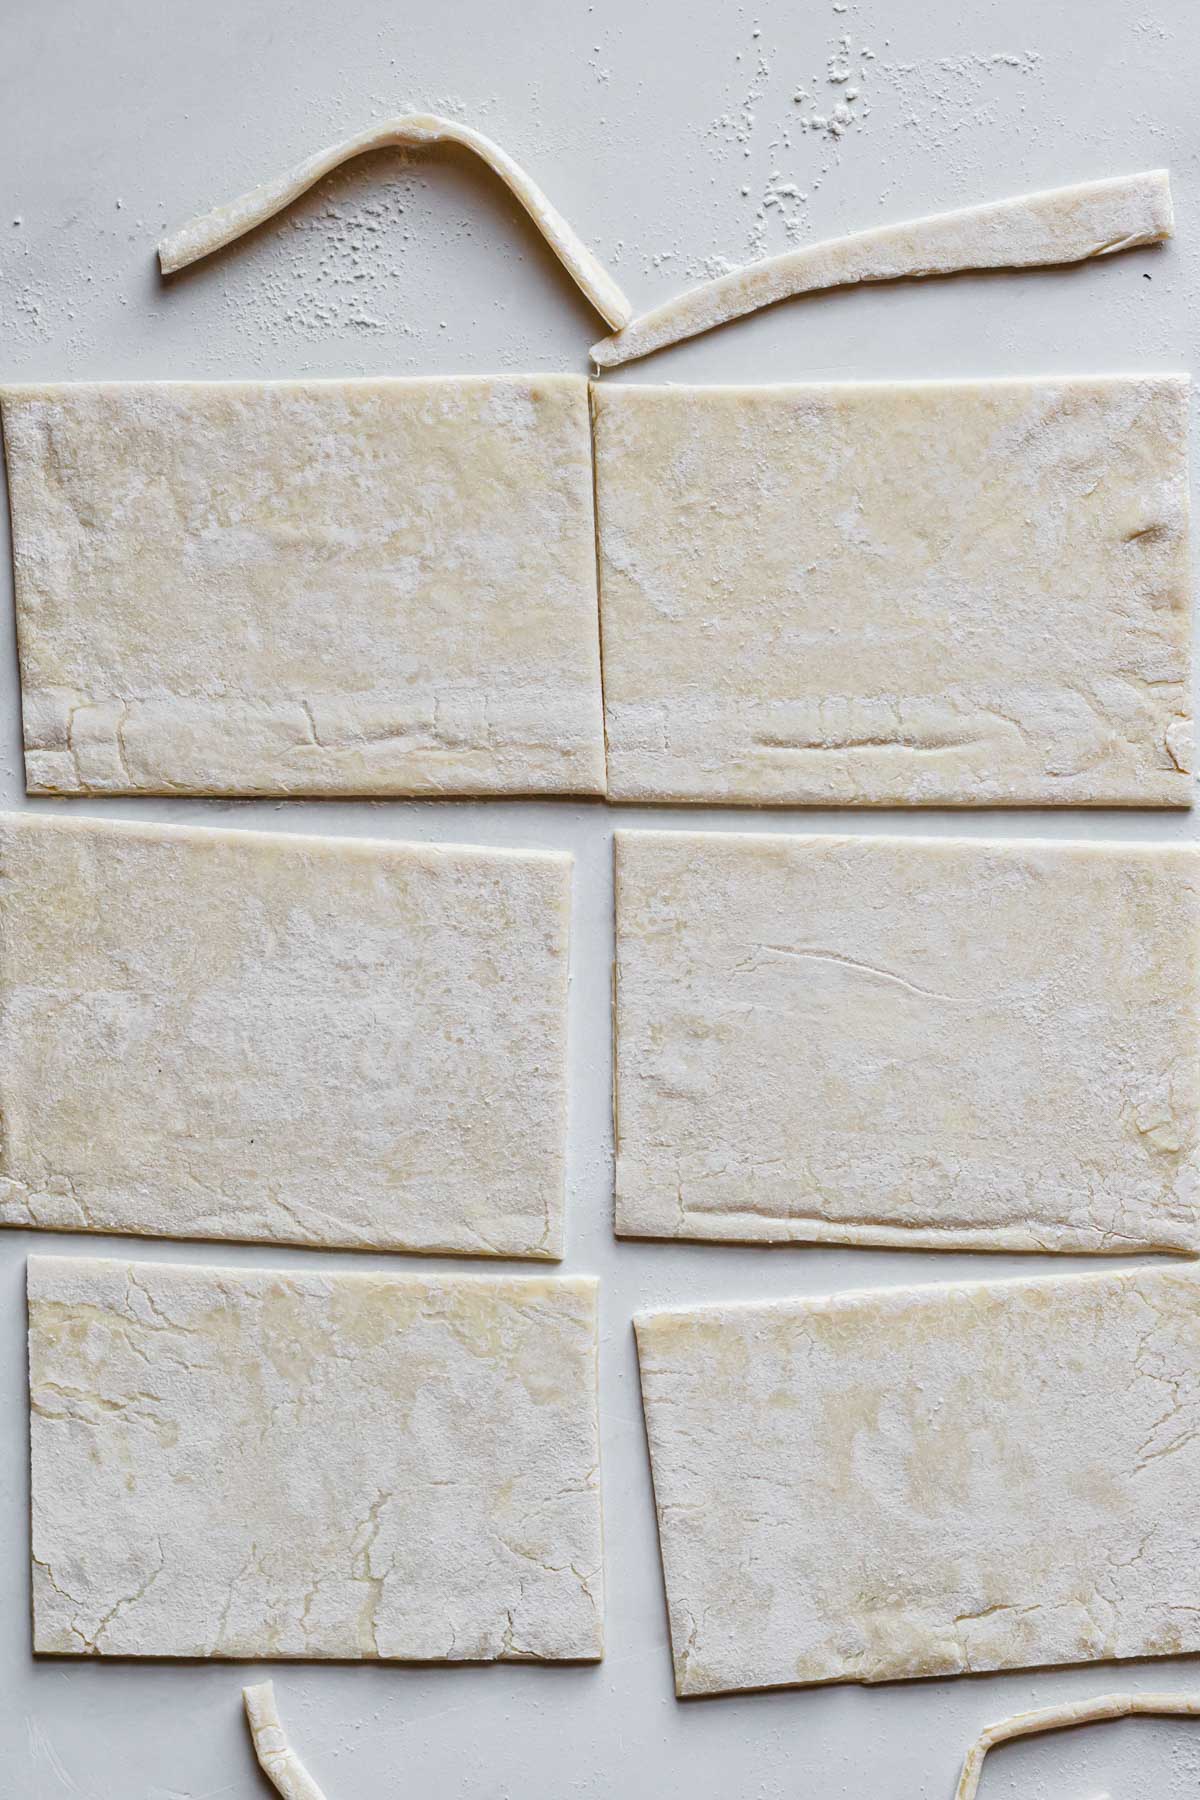 Puff pastry cut into six rectangles.